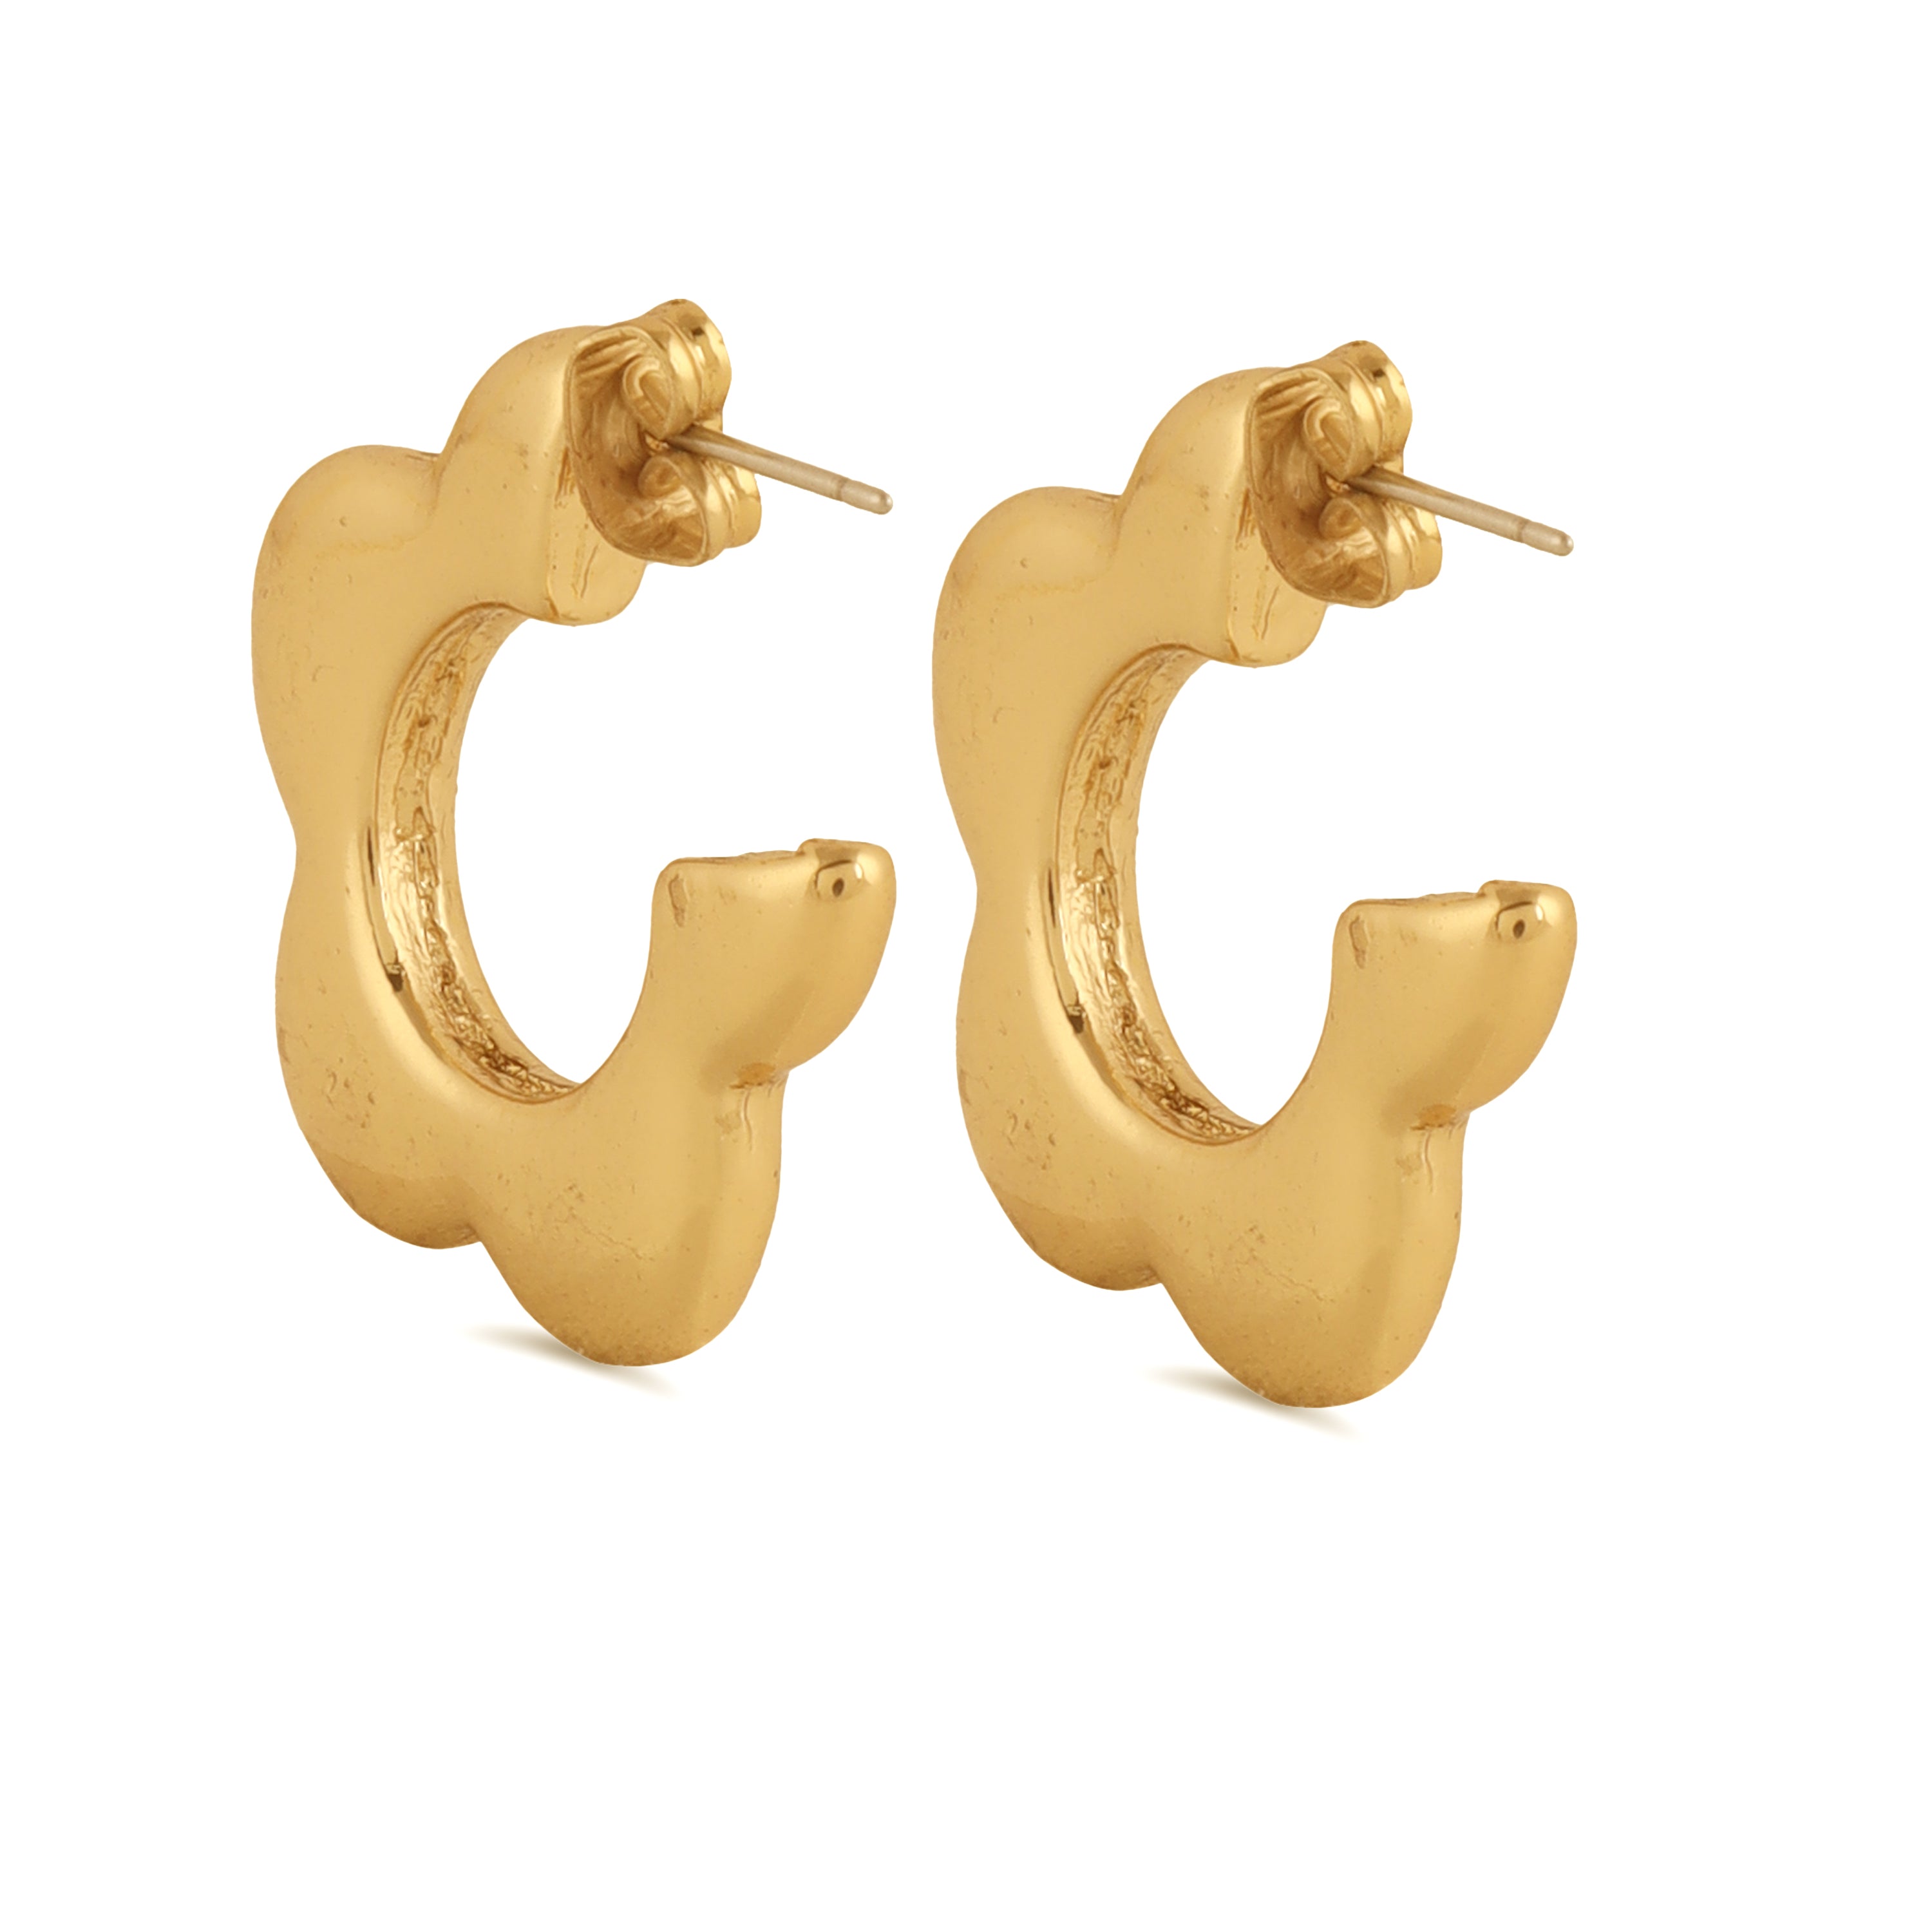 TFC Cute Daisy Gold Plated Hoop Earrings- Discover daily wear gold earrings including stud earrings, hoop earrings, and pearl earrings, perfect as earrings for women and earrings for girls.Find the cheapest fashion jewellery which is anti-tarnis​h only at The Fun company